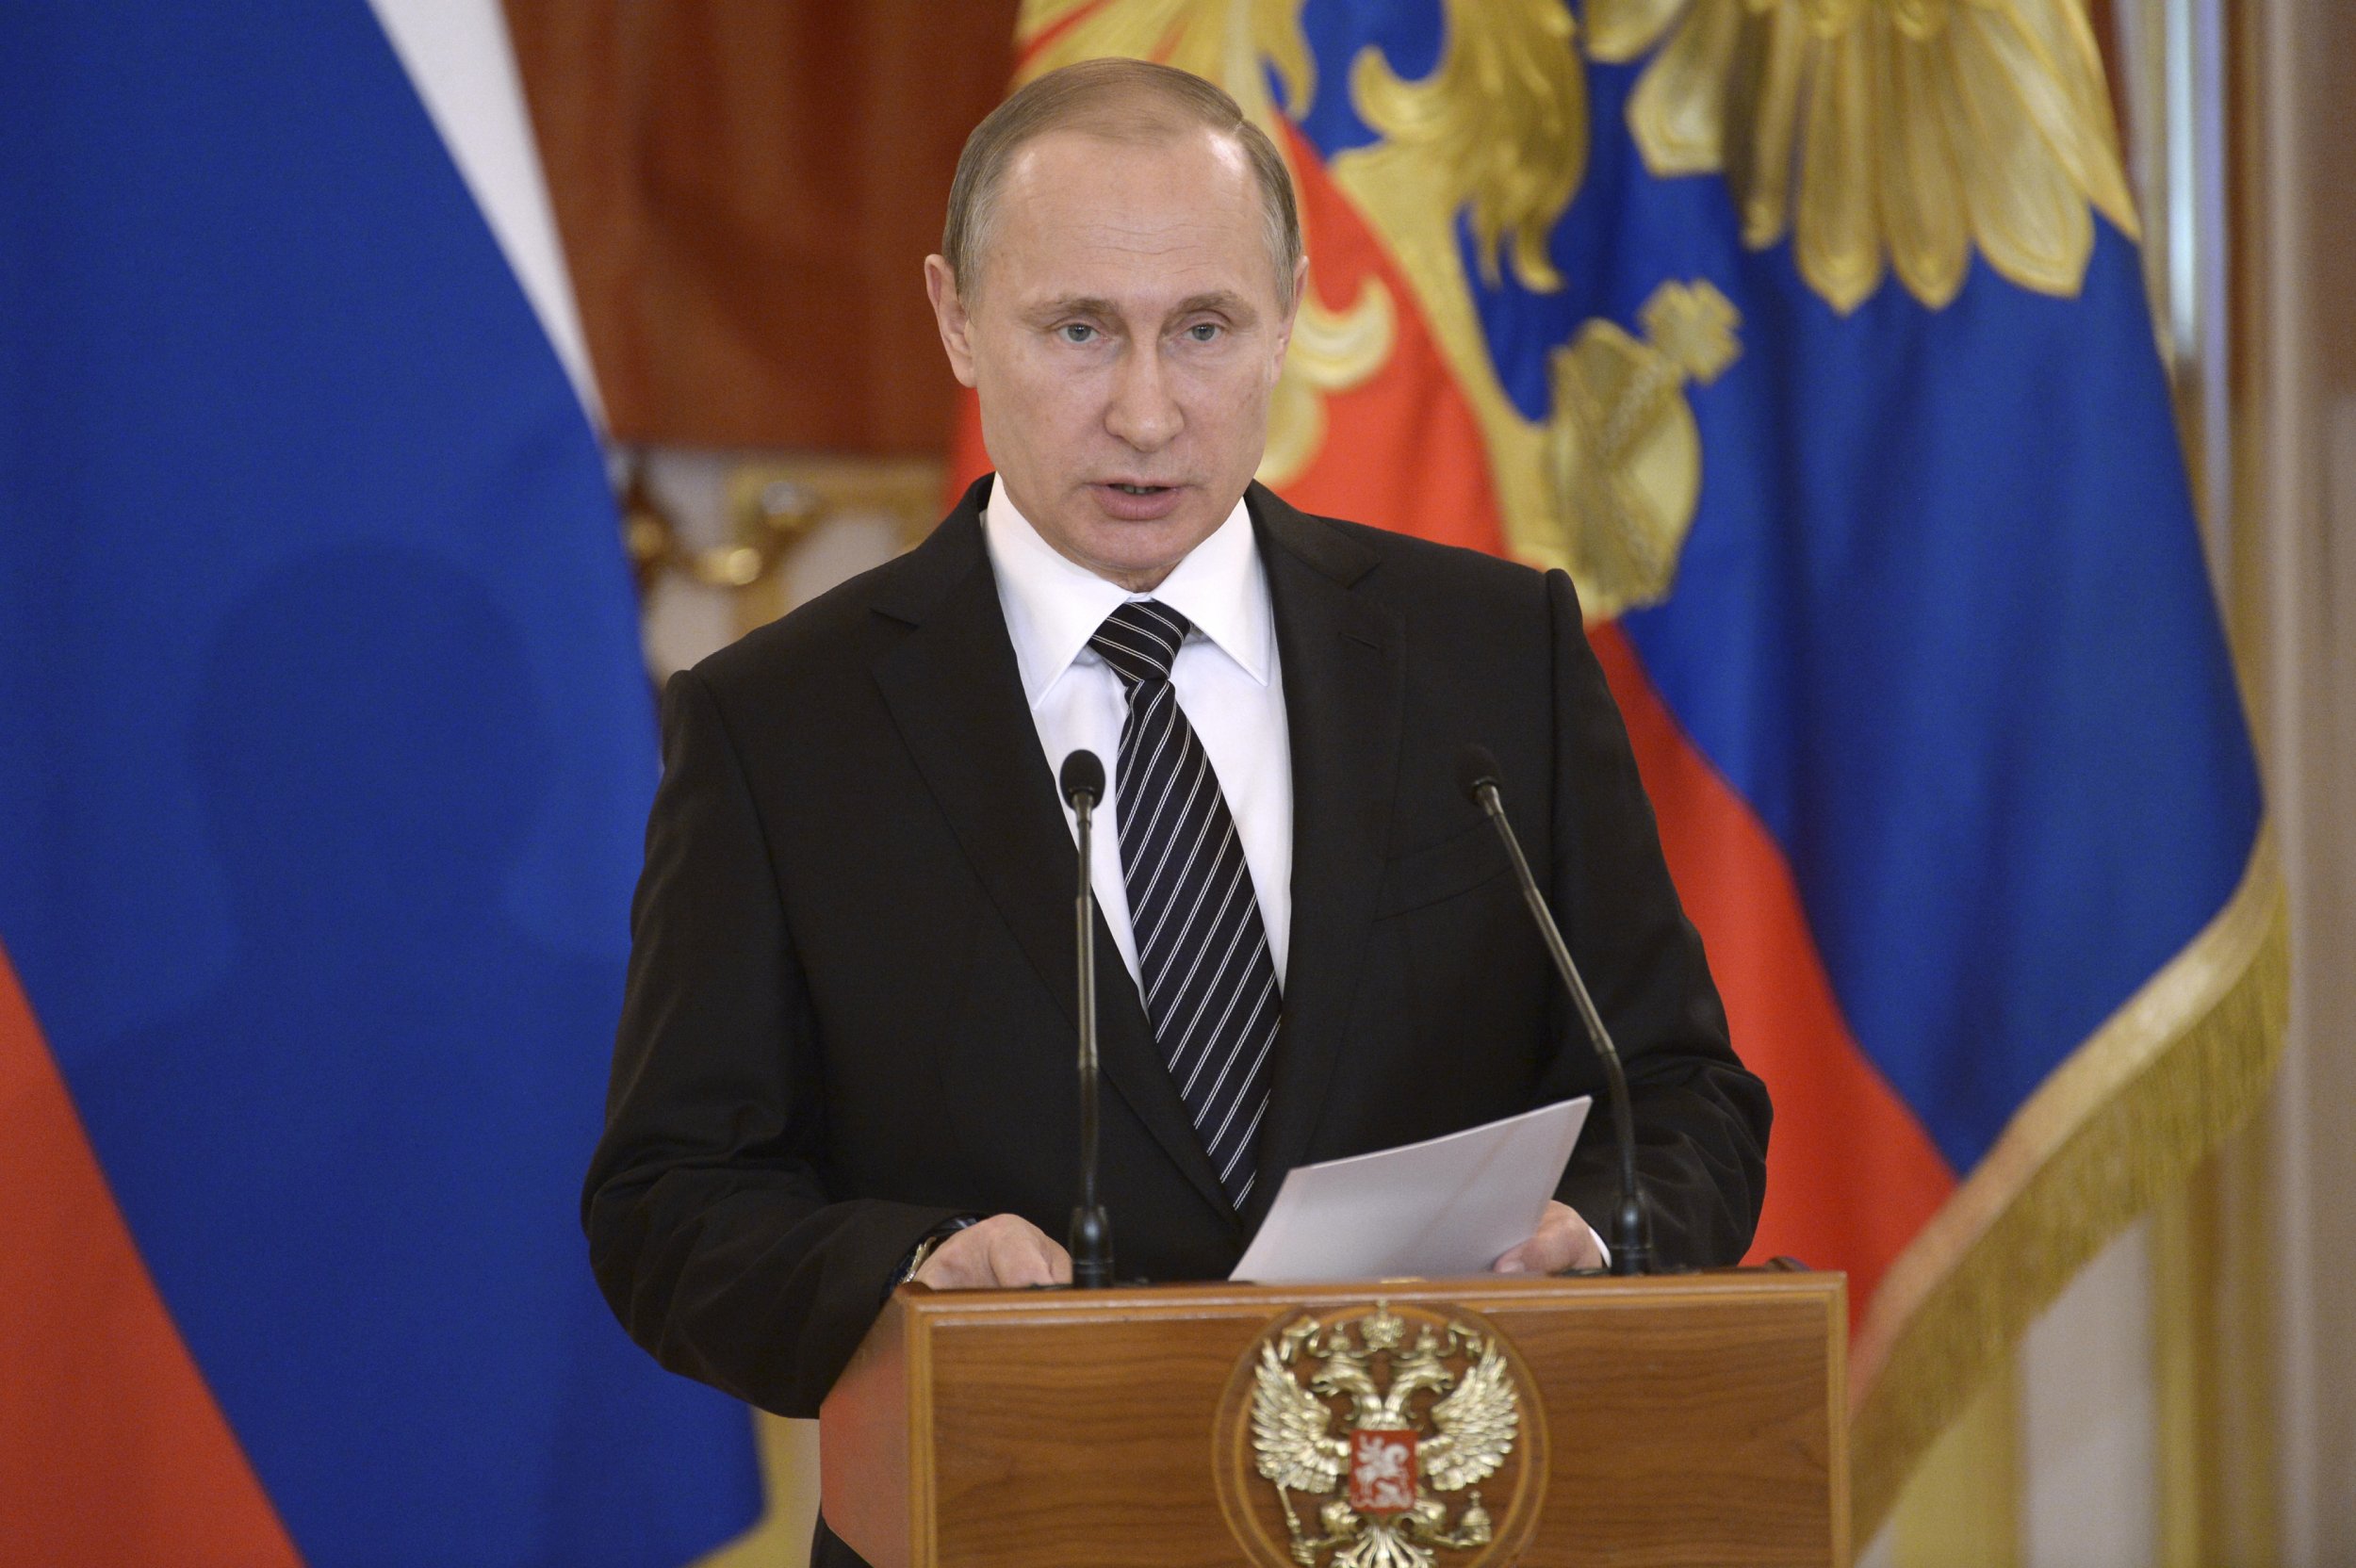 Russia Could Build Up its Forces in Syria Again Within Hours, Putin Says